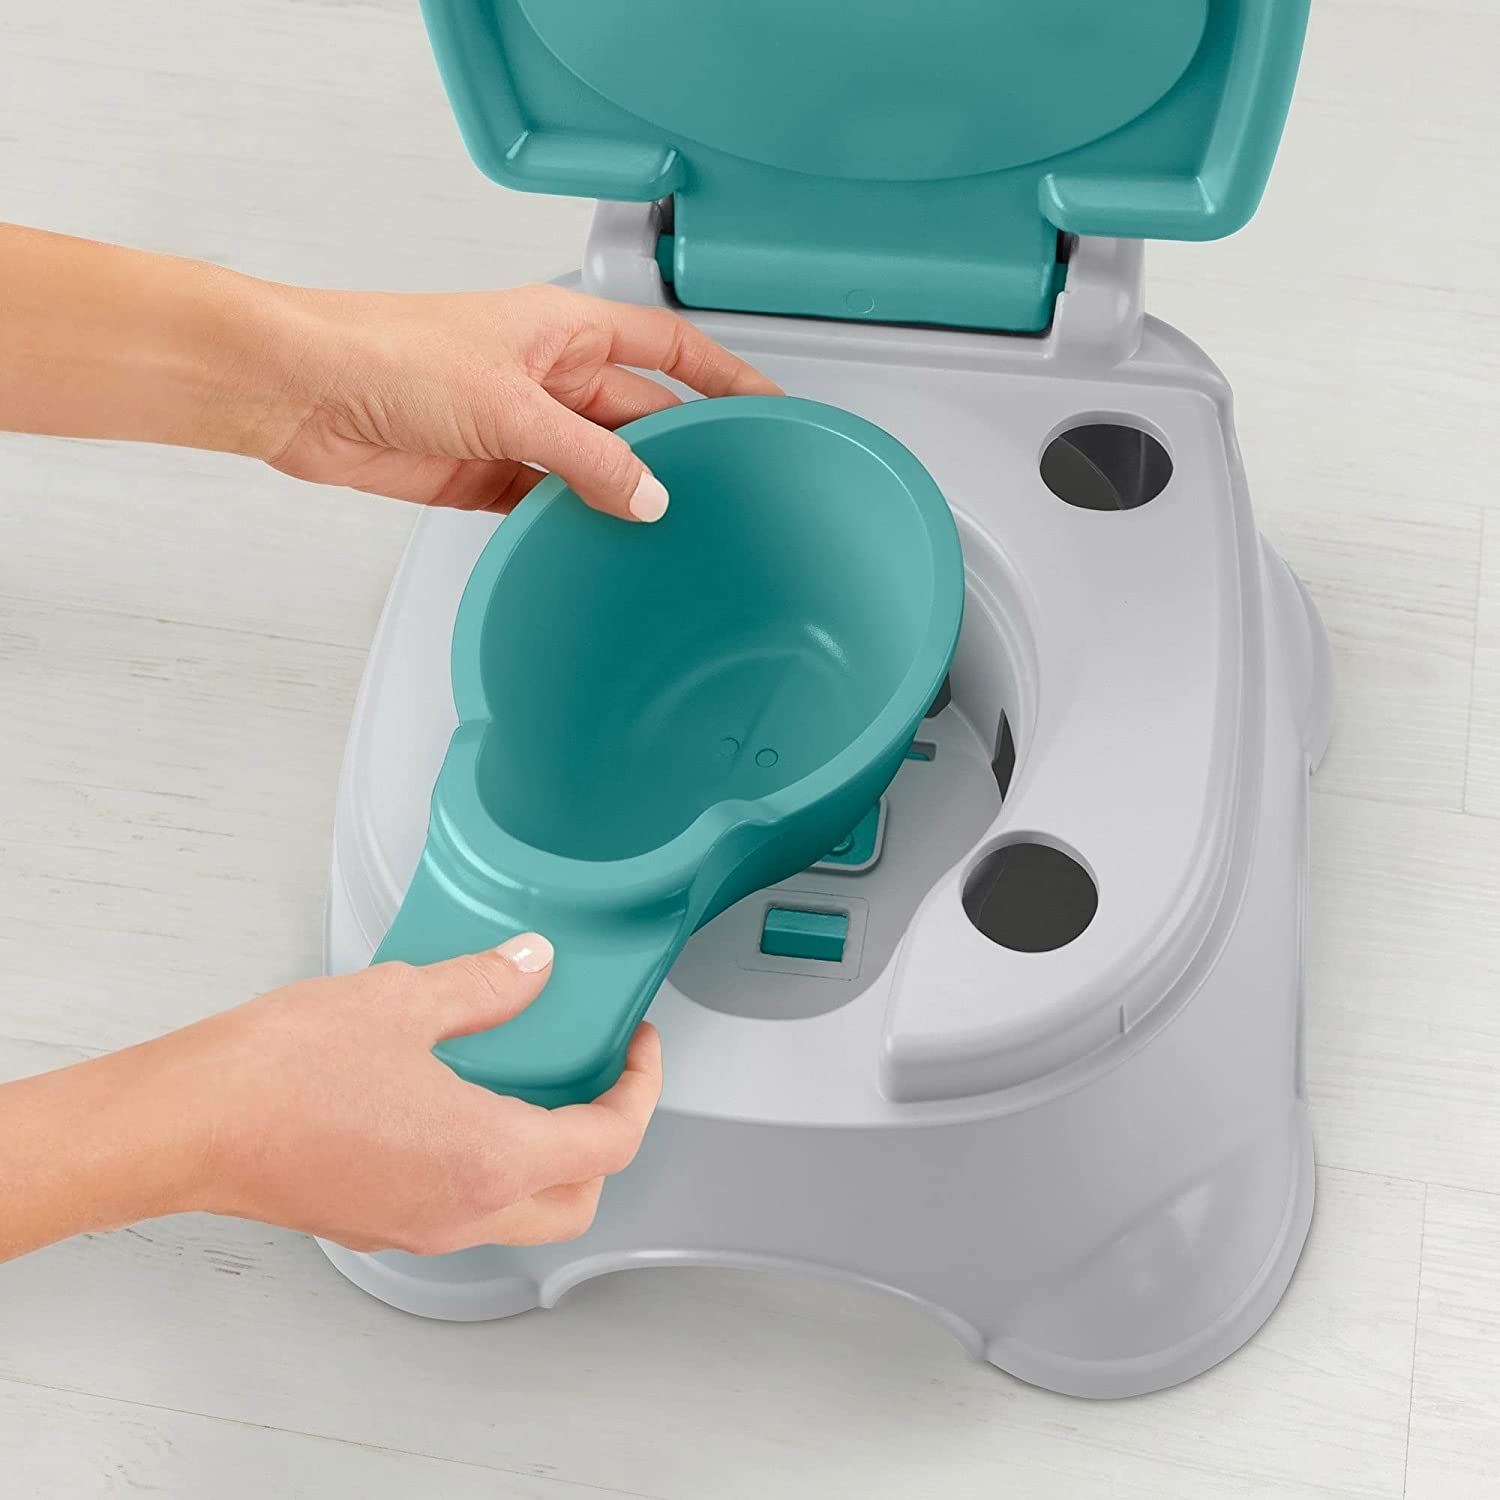 Fisher-Price 3 in 1 Potty Training Toilet Ring and Stepstool Simple Cleaning Ergonomic